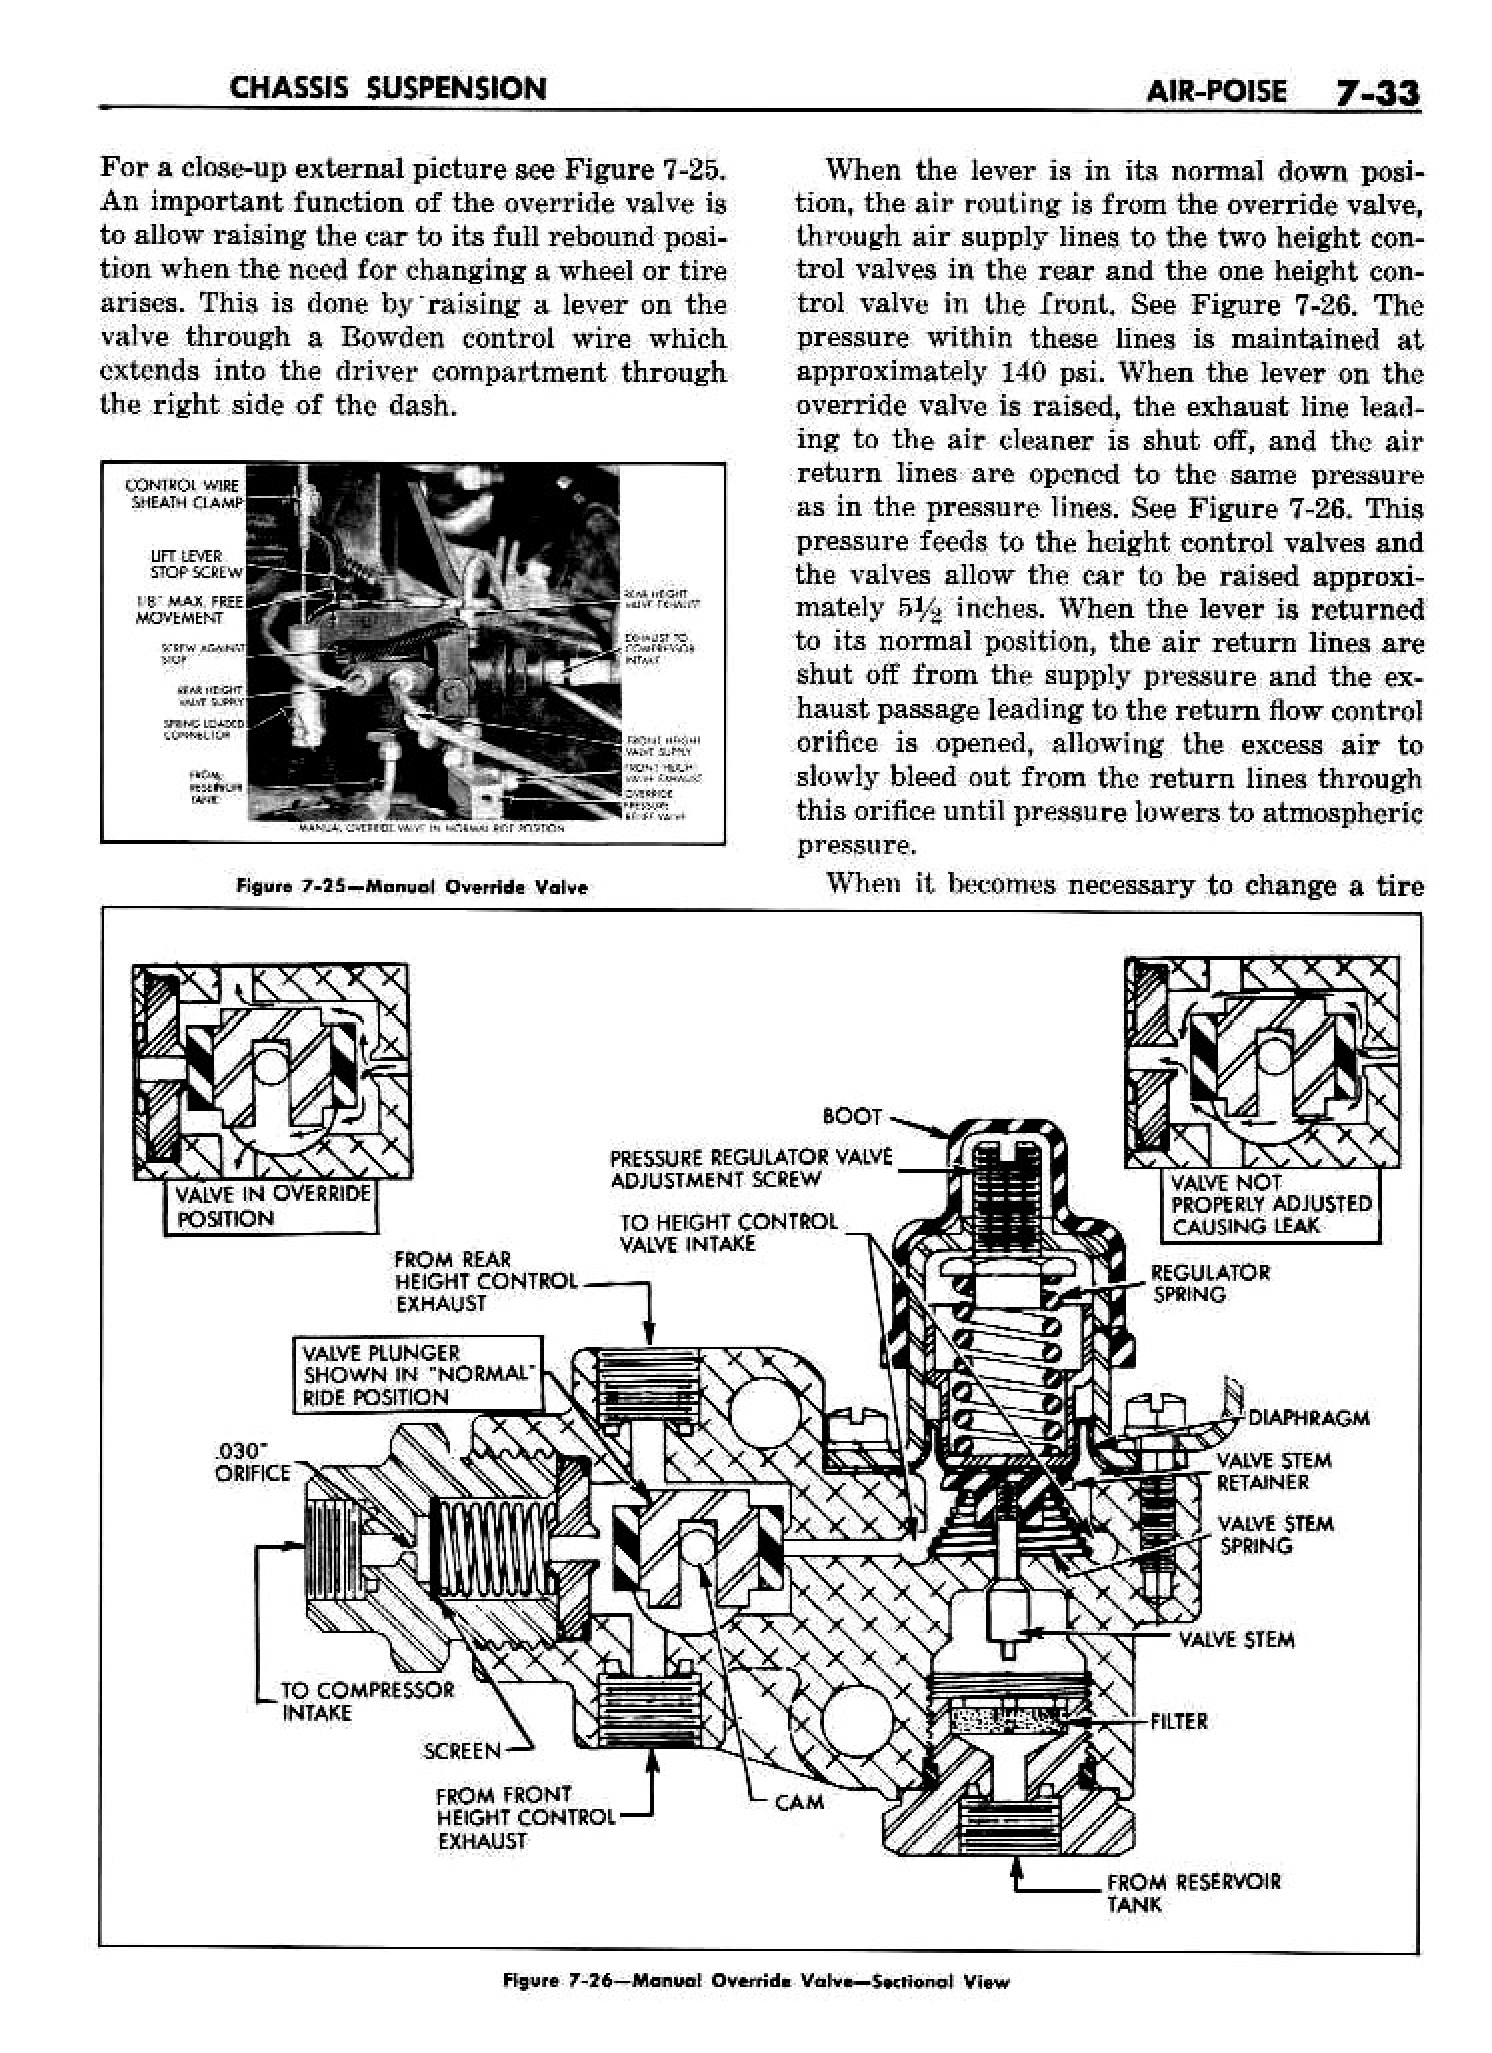 n_08 1958 Buick Shop Manual - Chassis Suspension_33.jpg